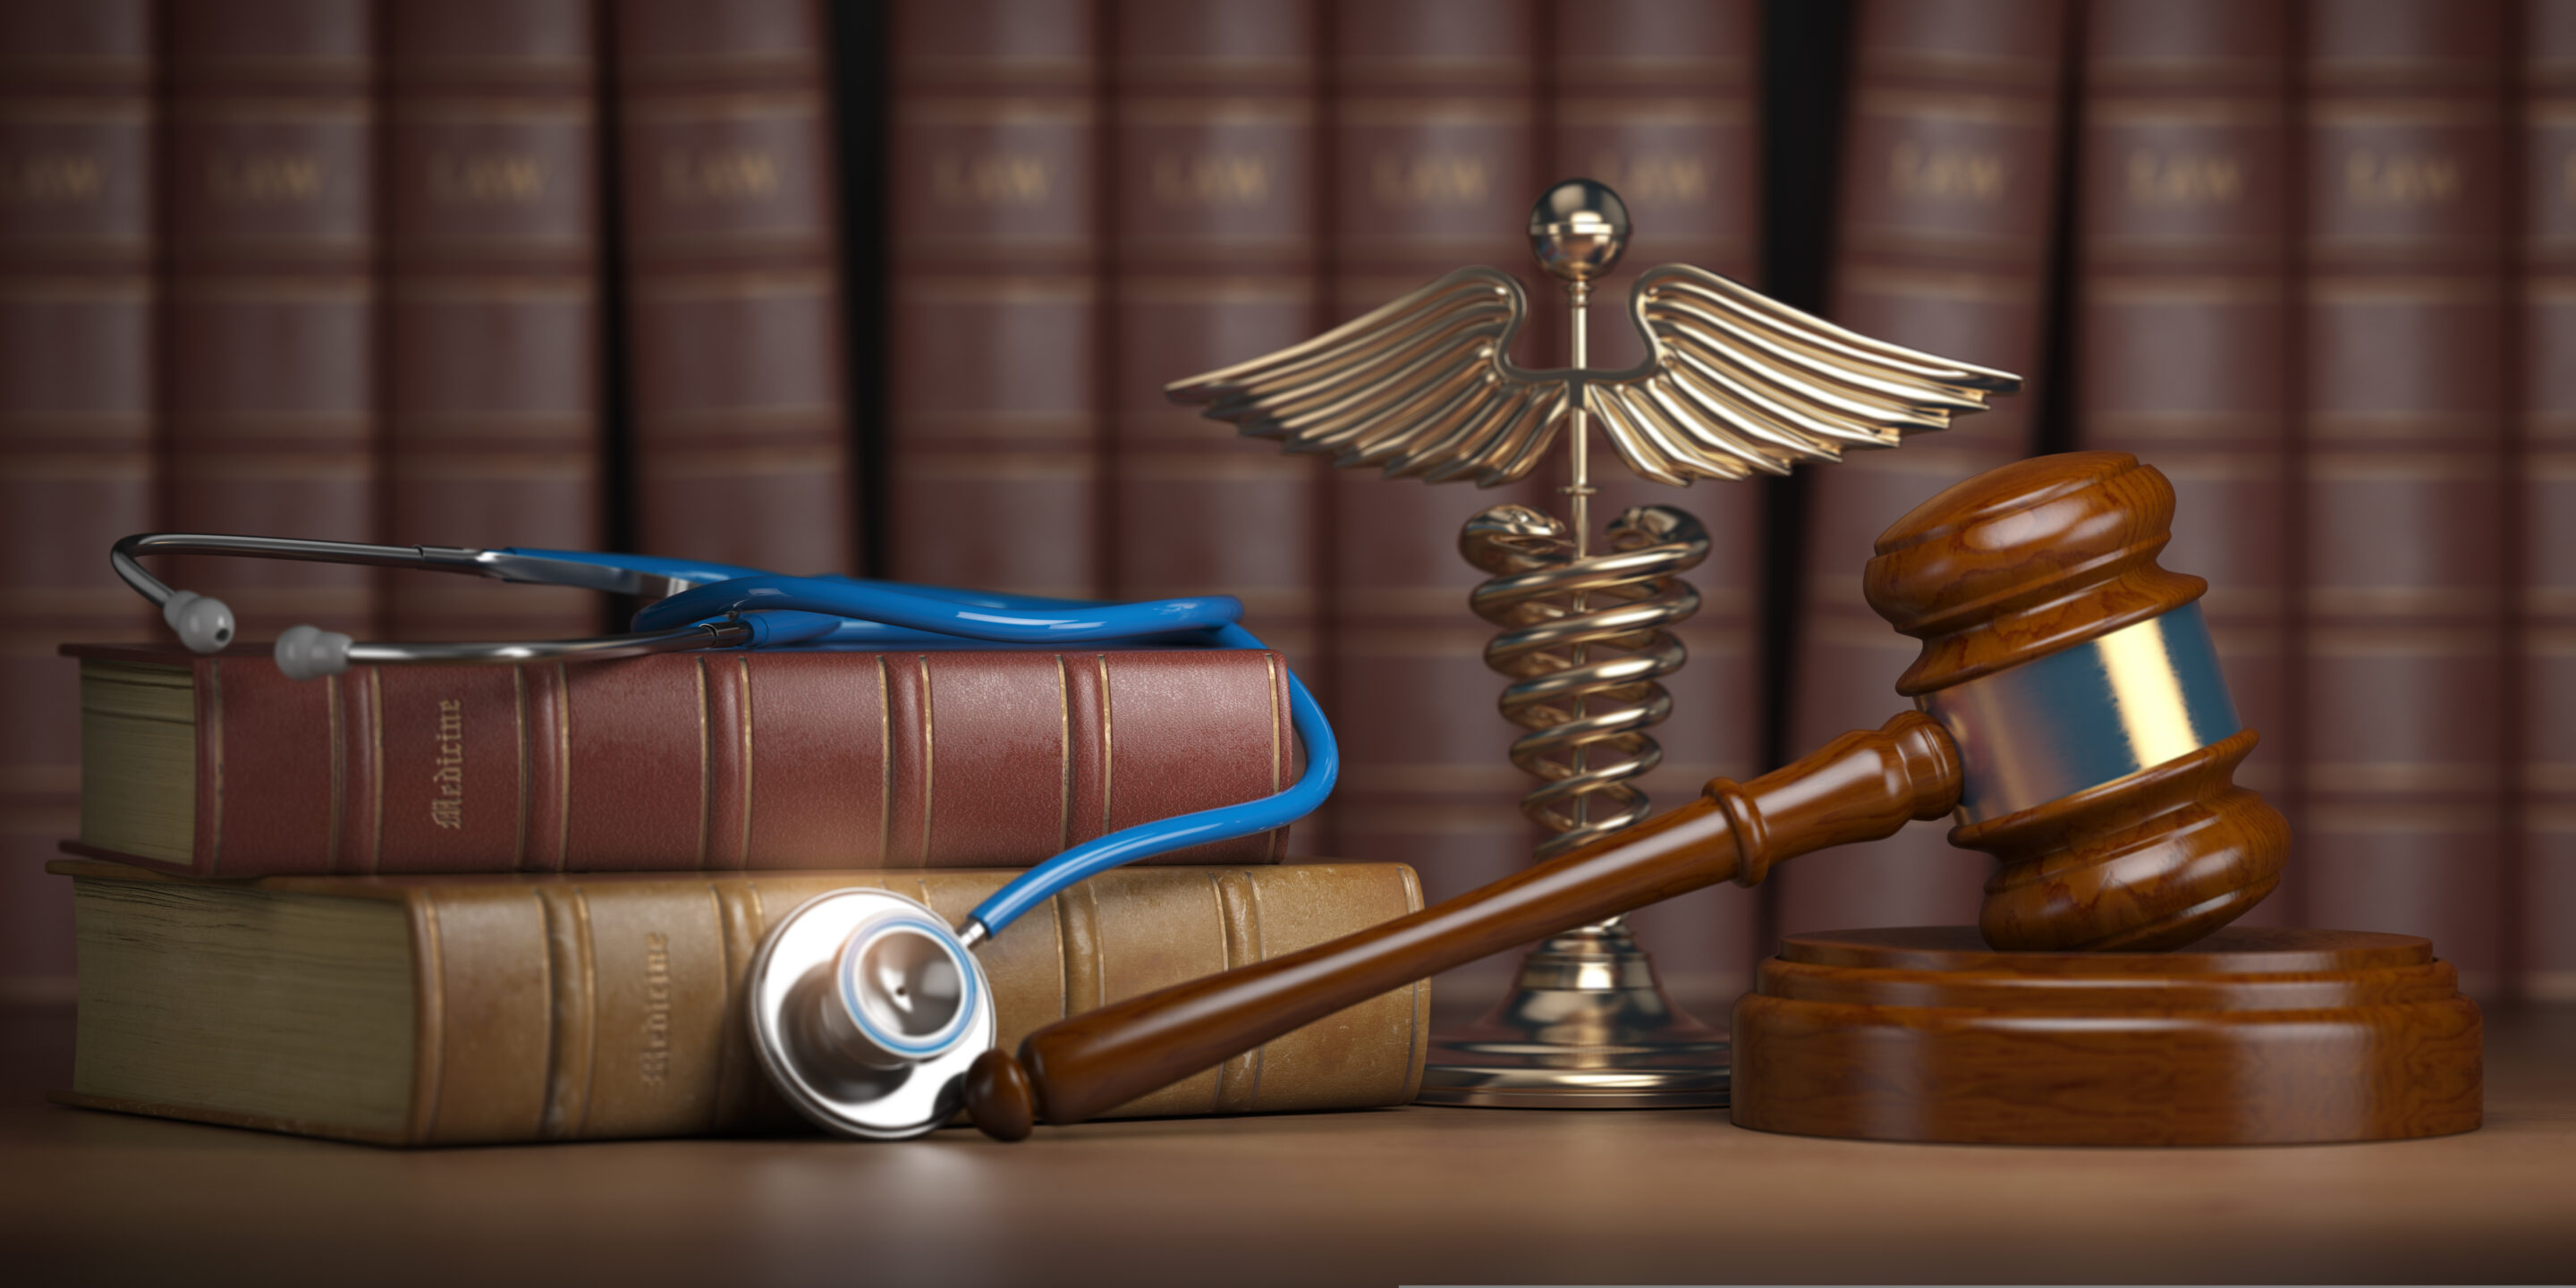 gavel,,stethoscope,and,caduceus,sign,on,books,background.,mediicine,laws